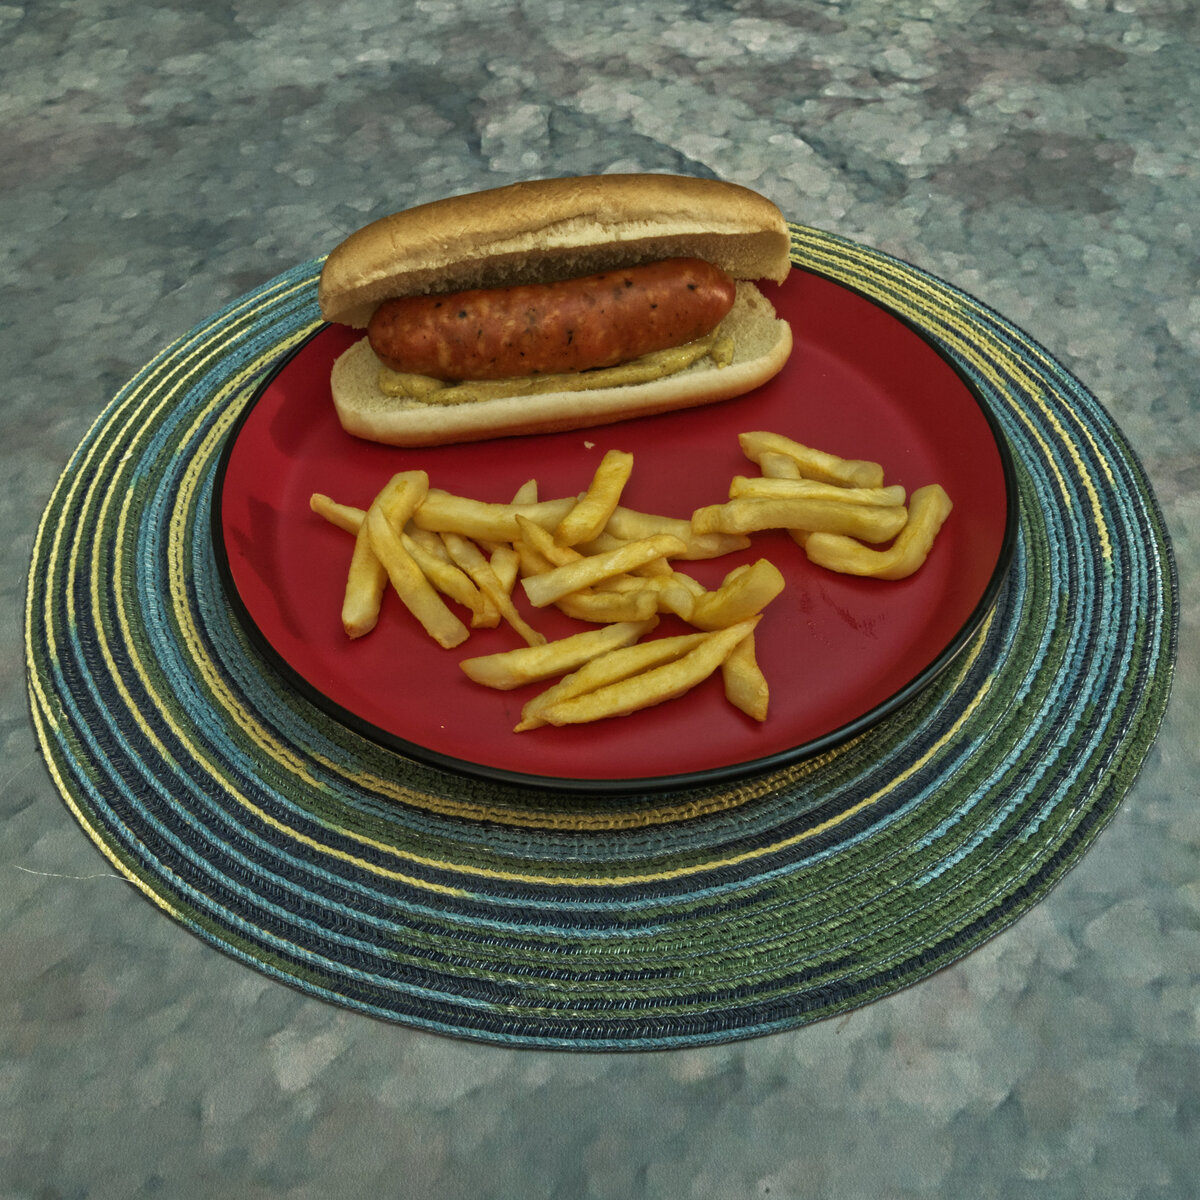 Andouille Sausage Sandwich and French Fries